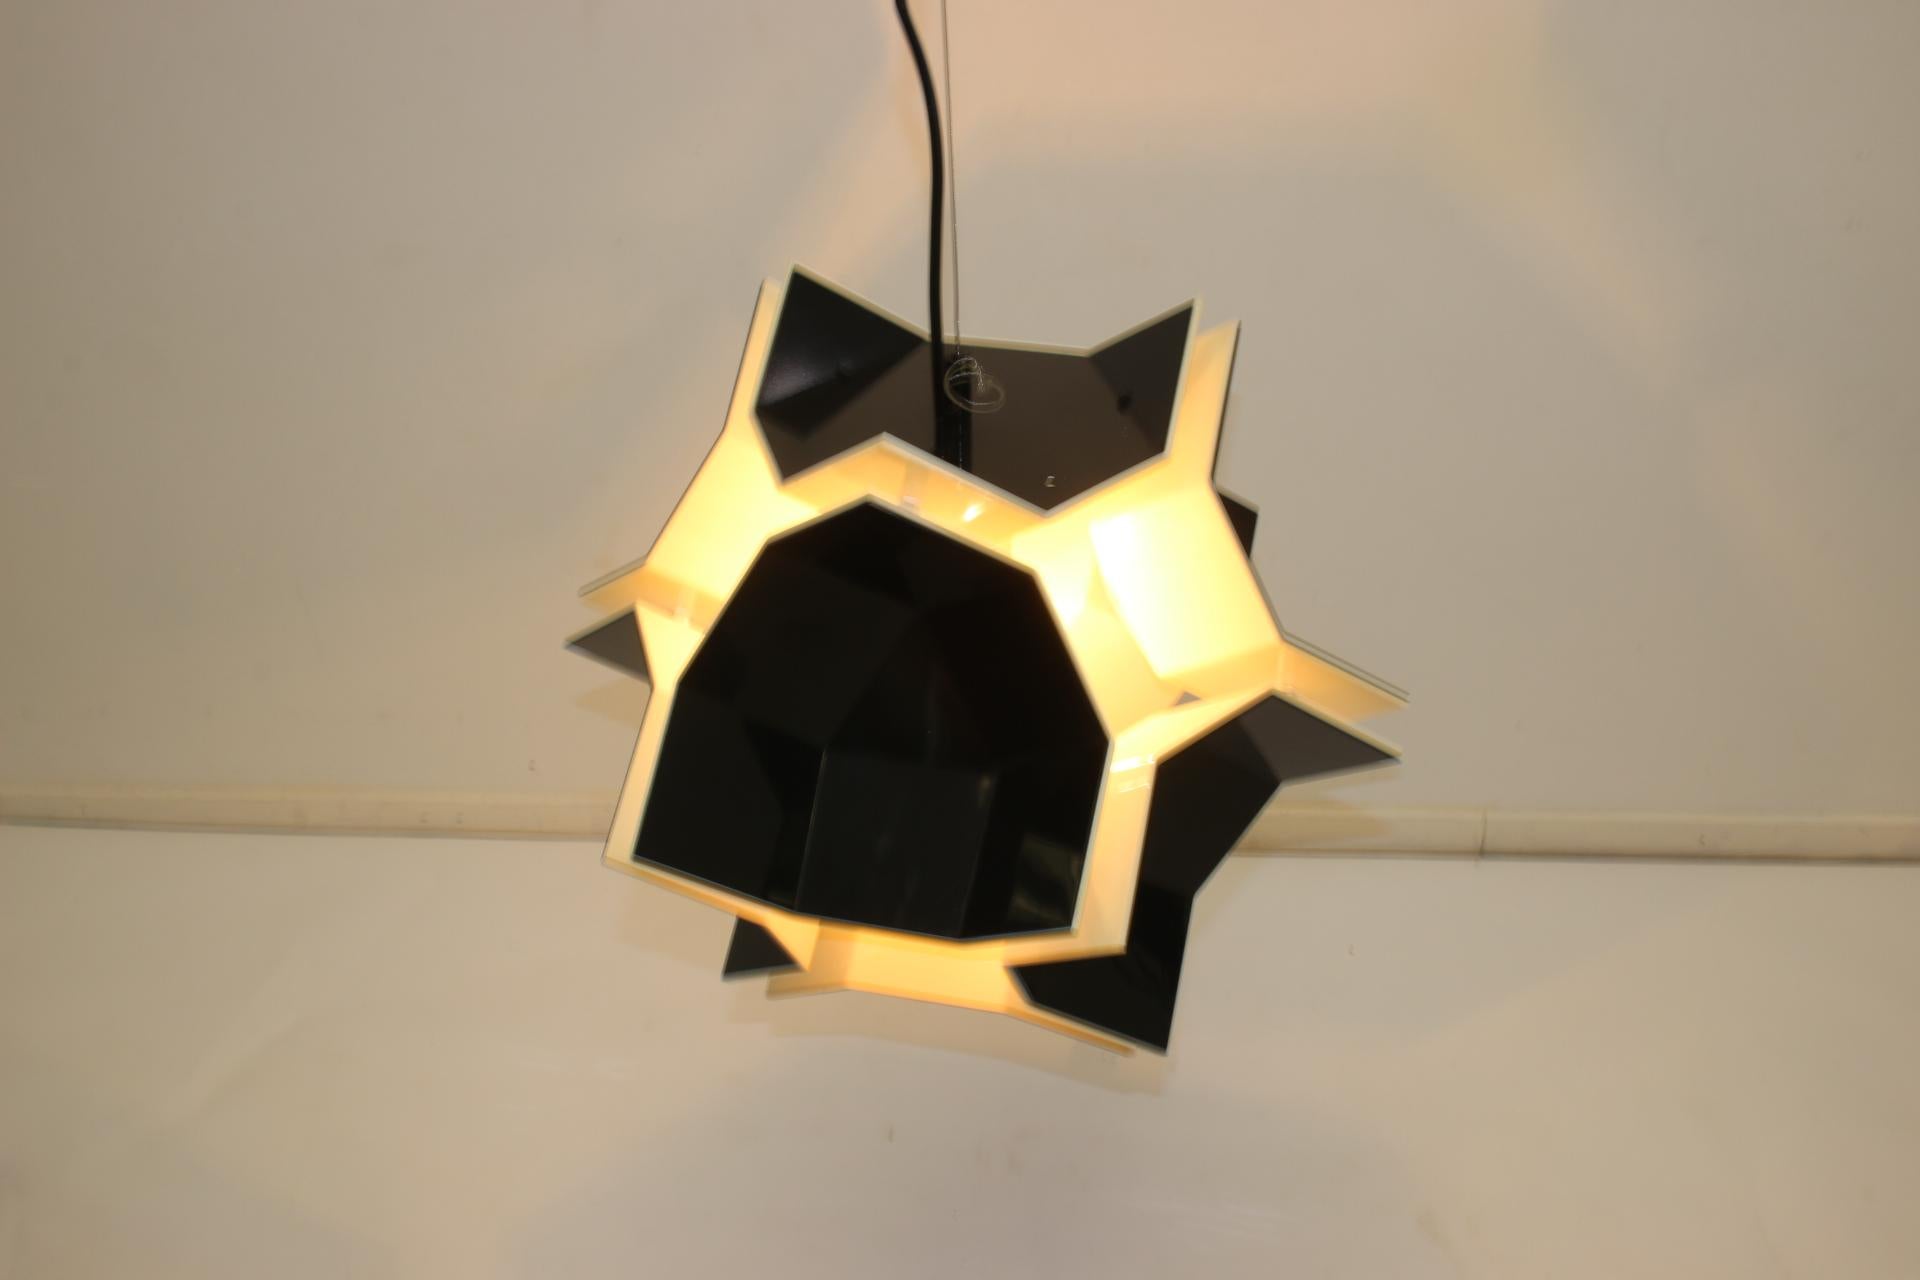 Space Age Acrylic Pendant Lamp by Christophe de Ryck for Dark, 1970s For Sale 14